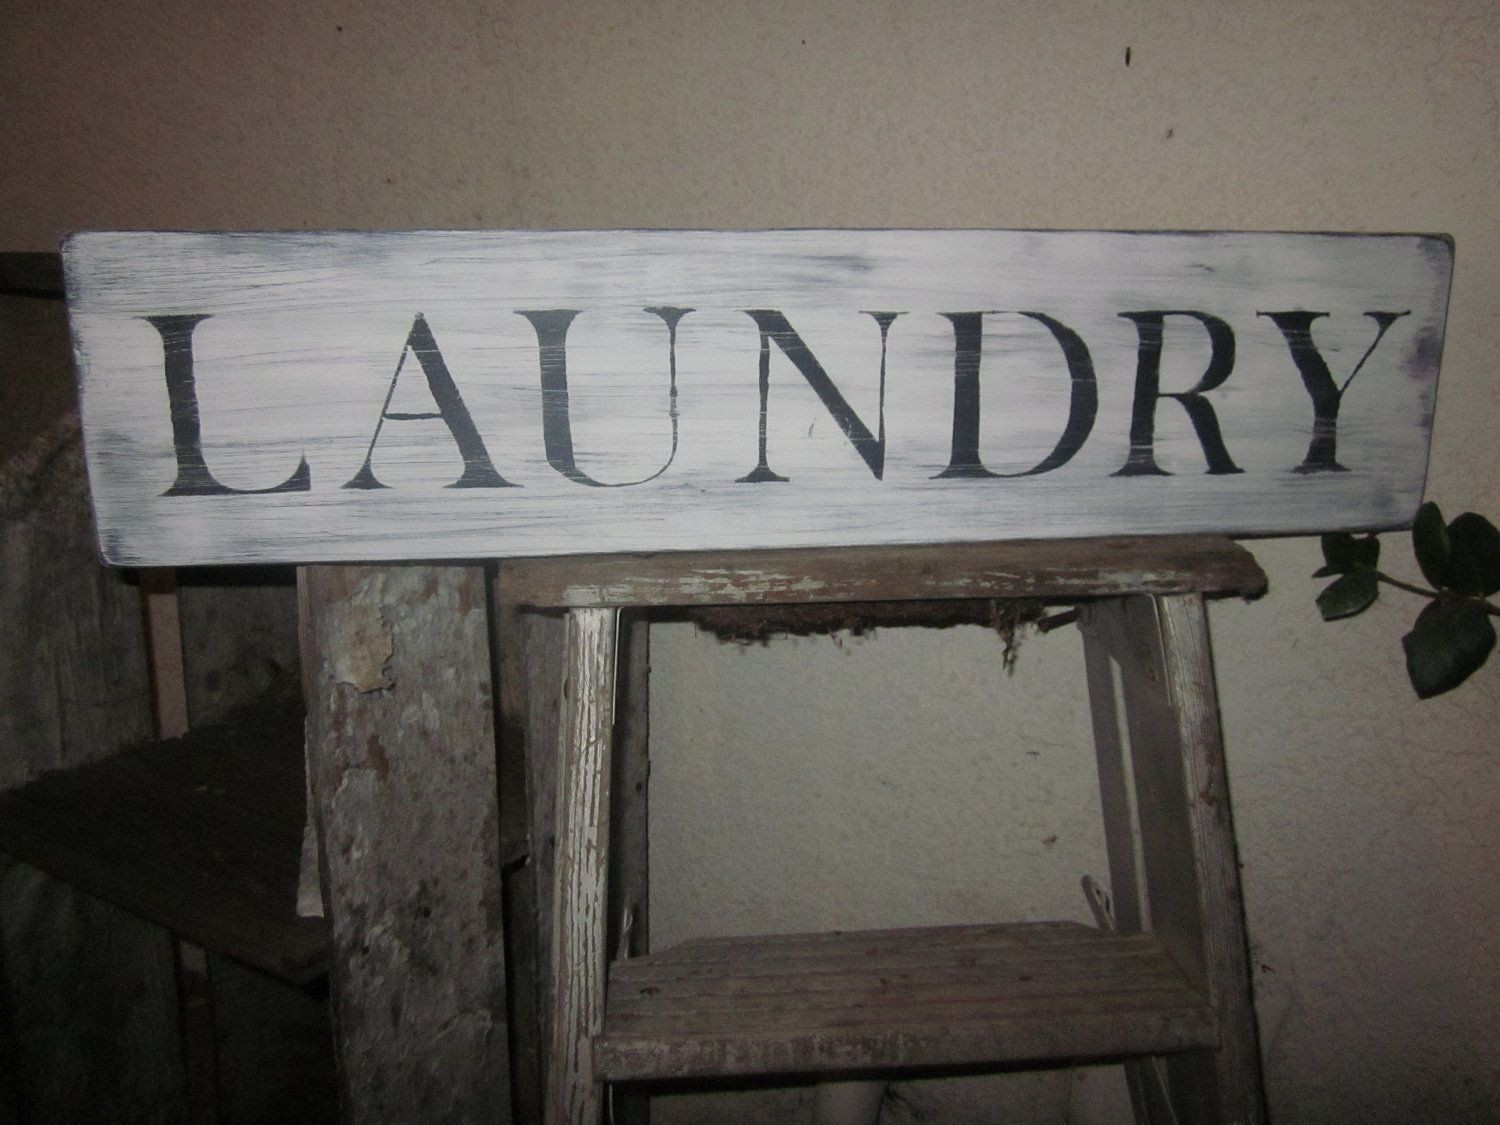 DIY Distressed Wood Signs
 LAUNDRY Room Wooden sign Home Decor Distressed and